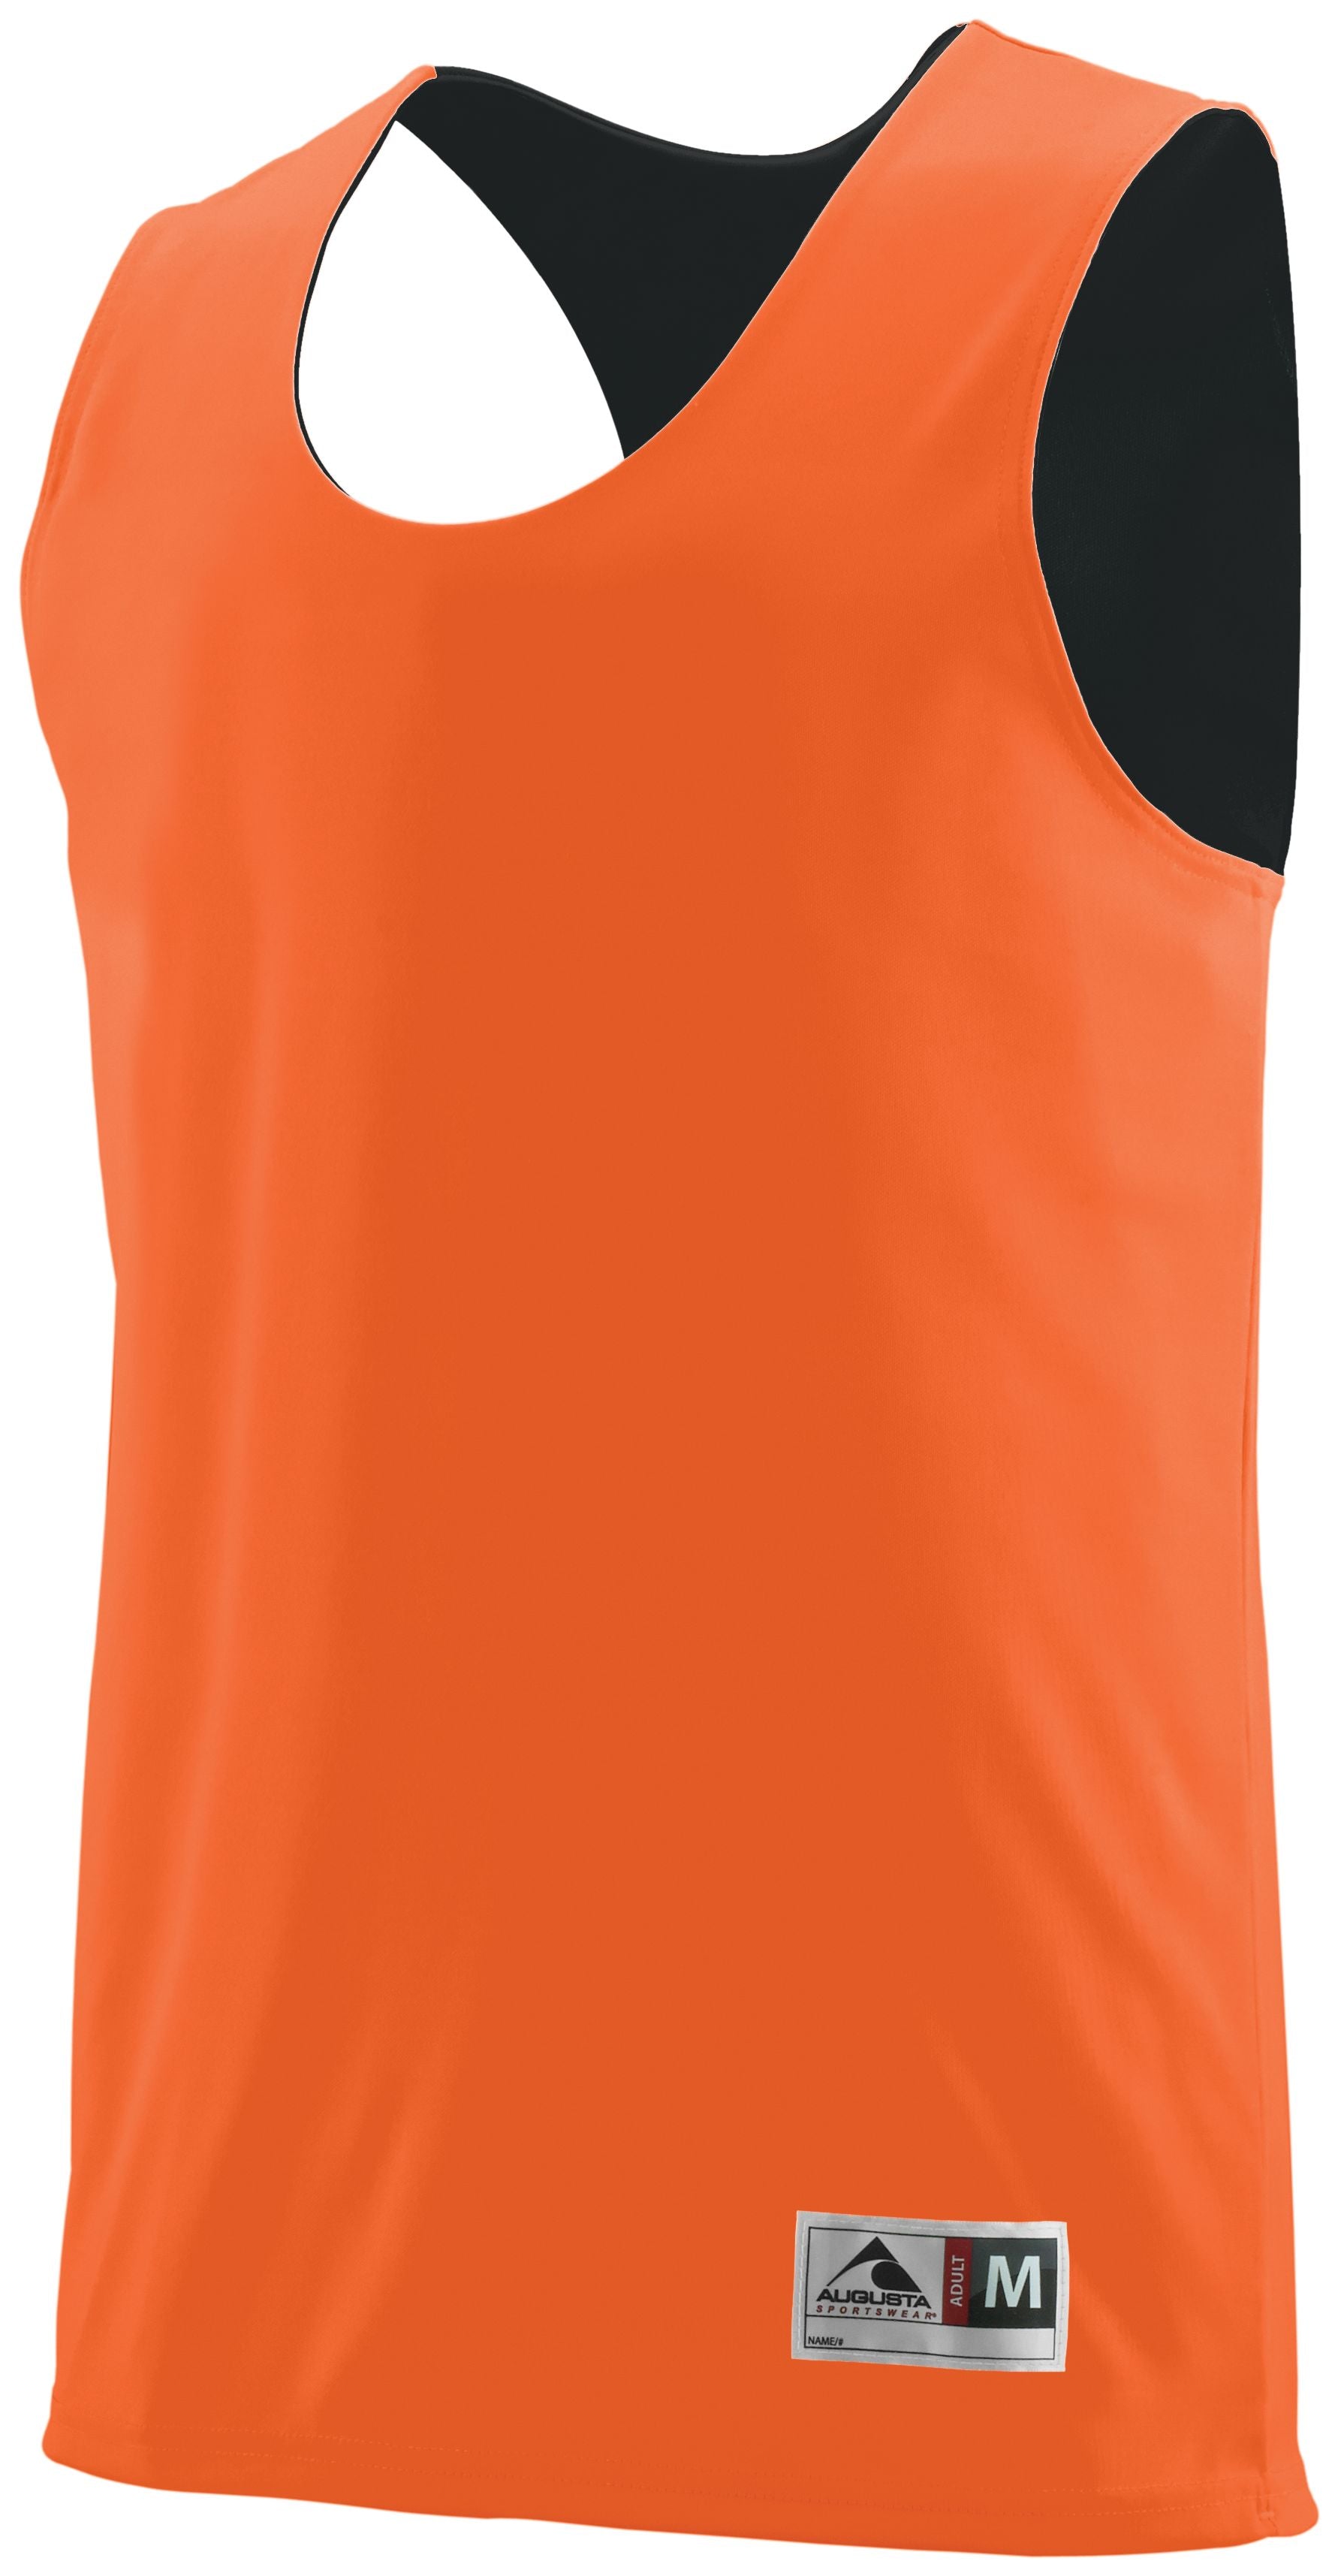 Augusta Sportswear Youth Reversible Wicking Tank in Orange/Black  -Part of the Youth, Youth-Tank, Augusta-Products, Basketball, Shirts, All-Sports, All-Sports-1 product lines at KanaleyCreations.com